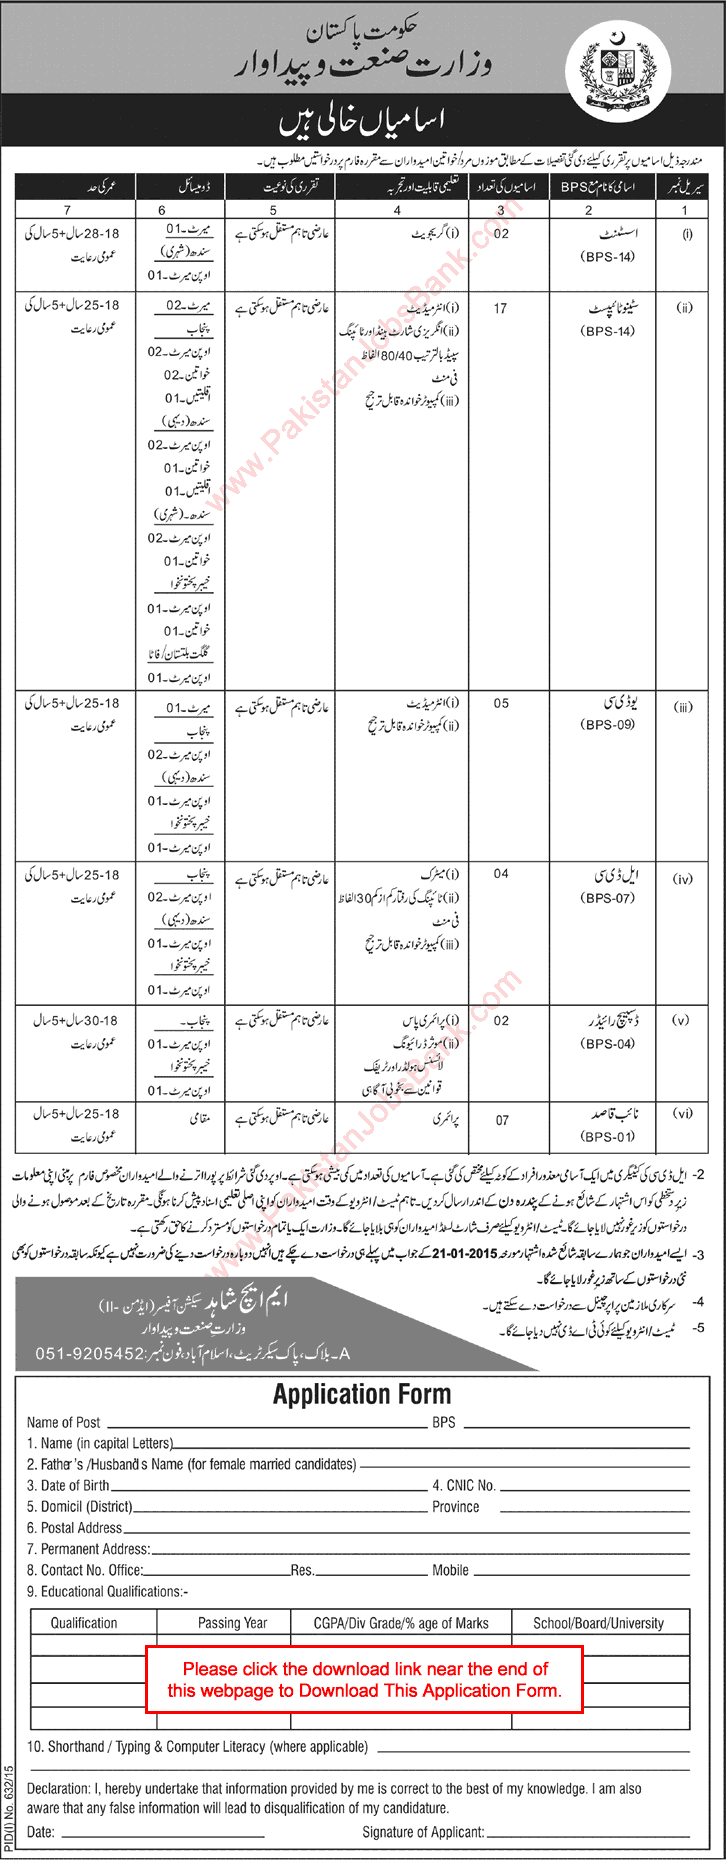 Ministry of Industries and Production Islamabad Jobs 2015 August Application Form Download Latest